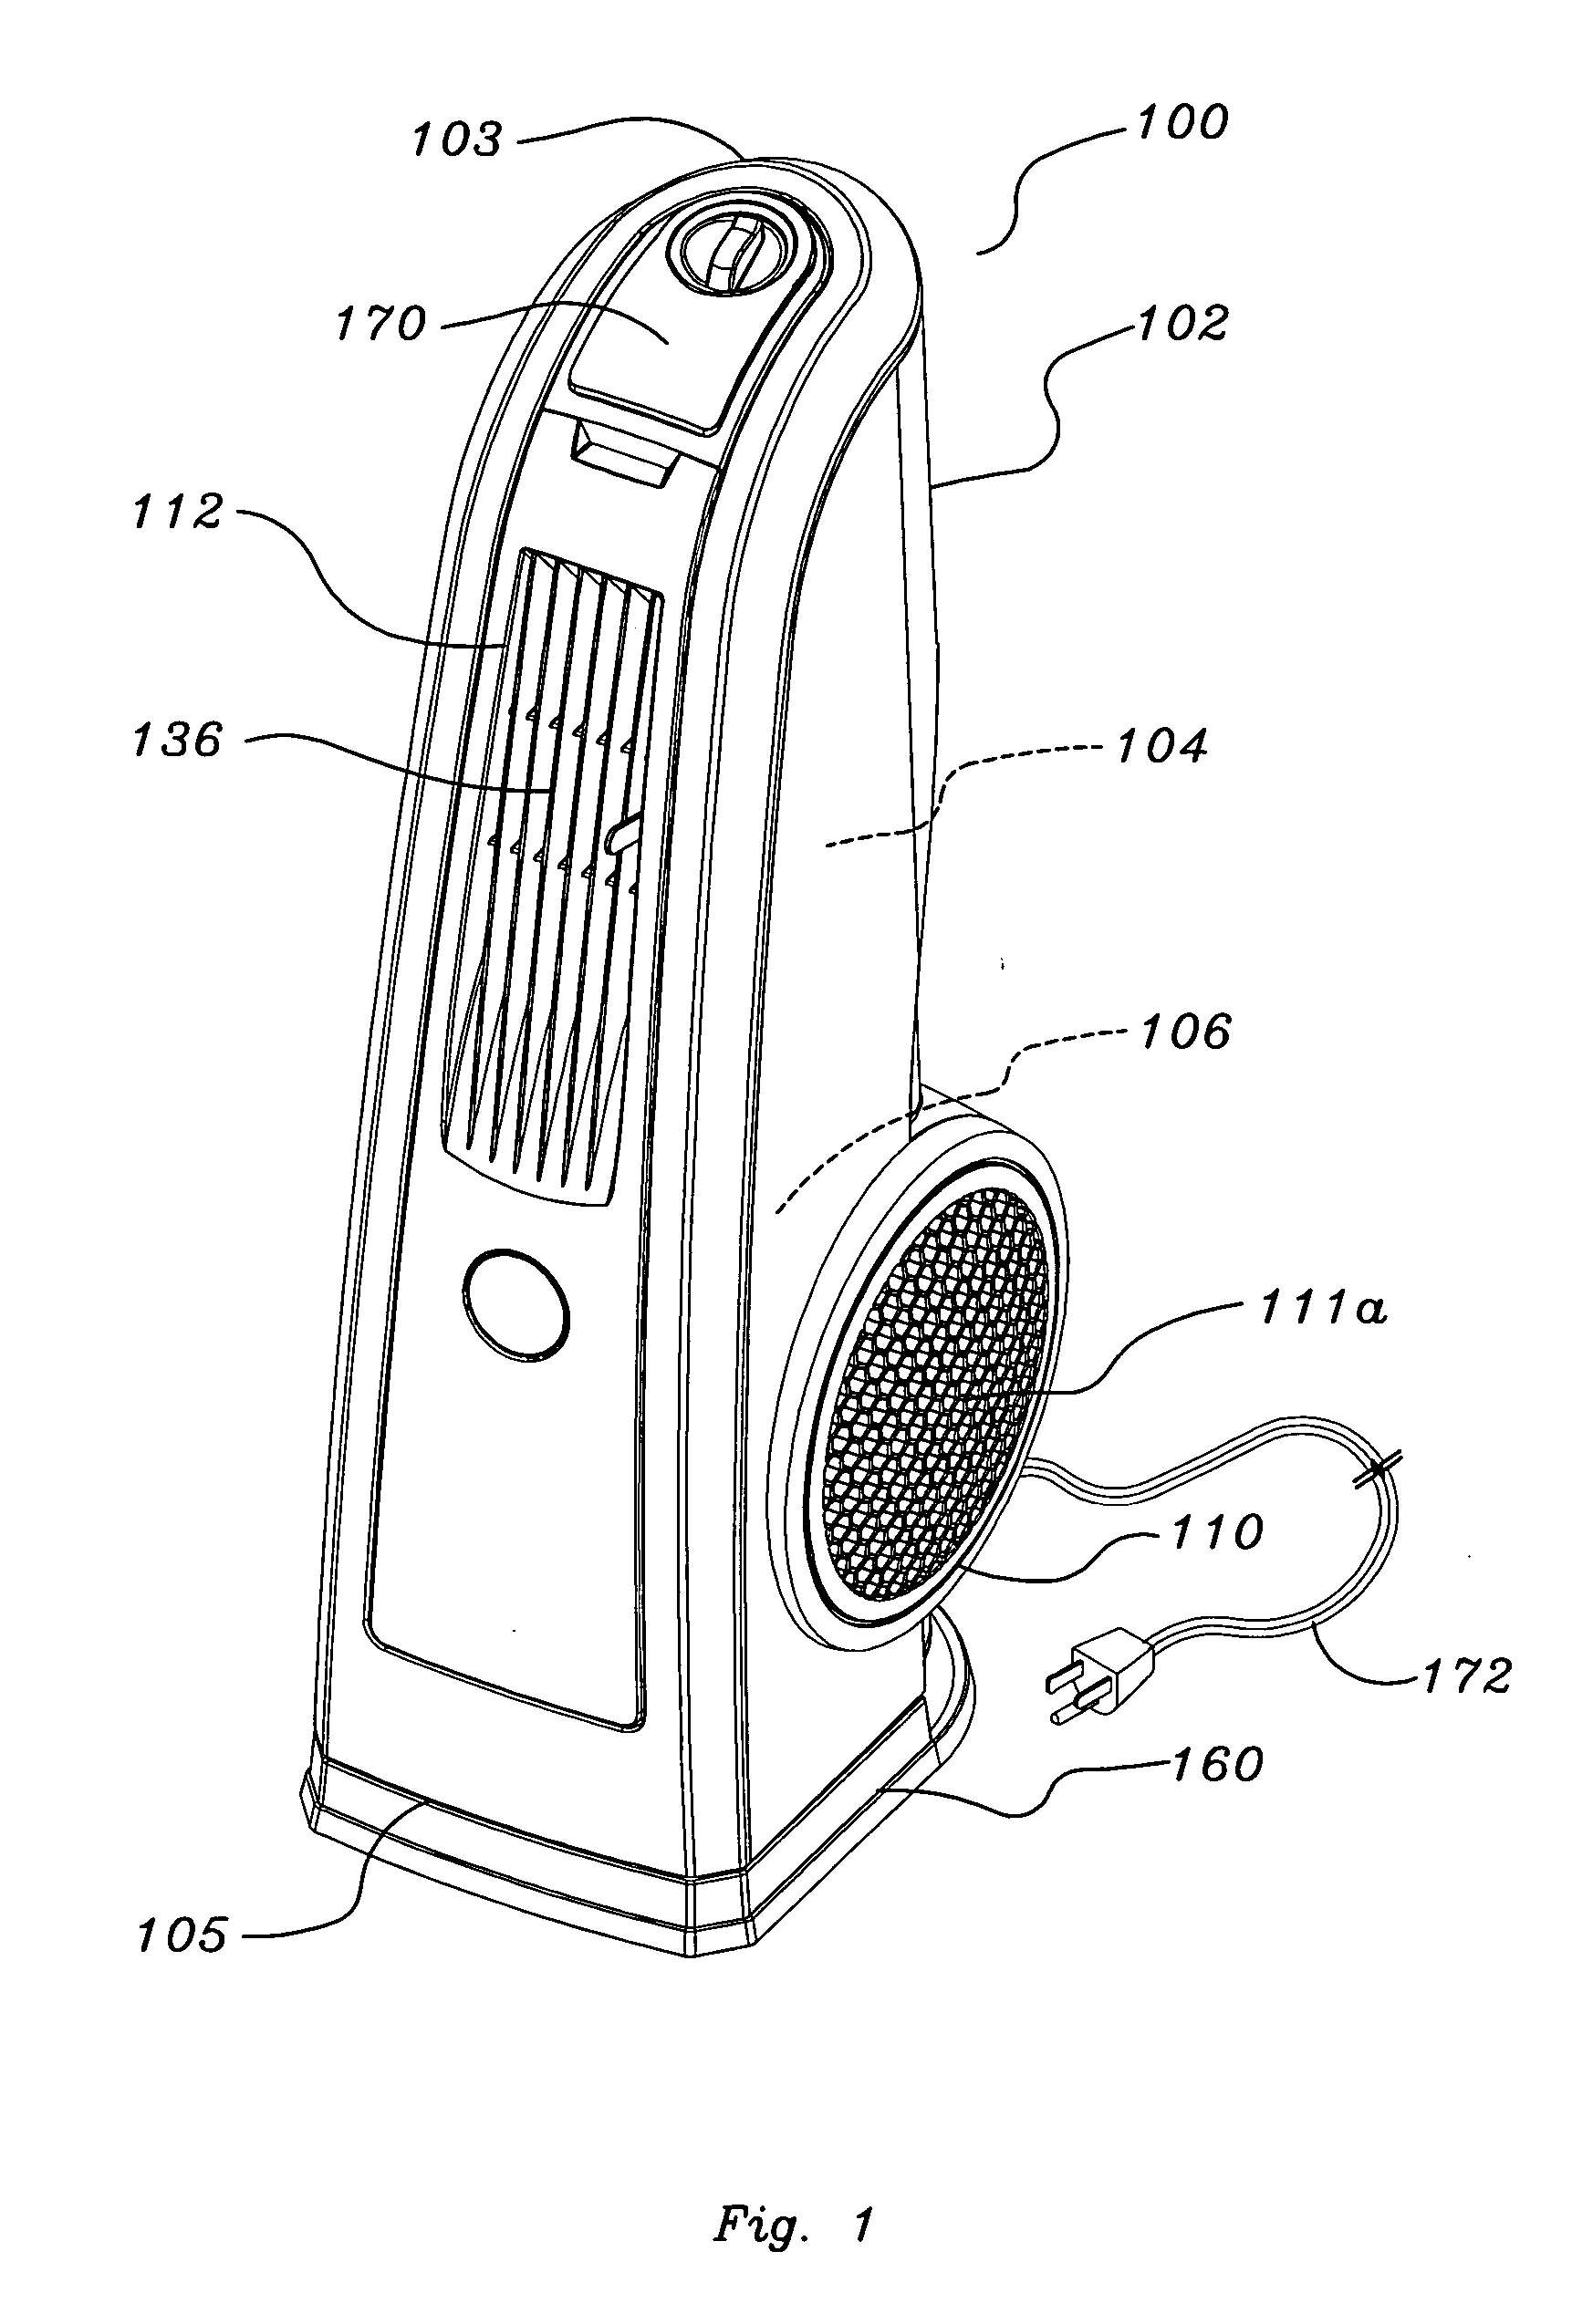 Portable air moving device